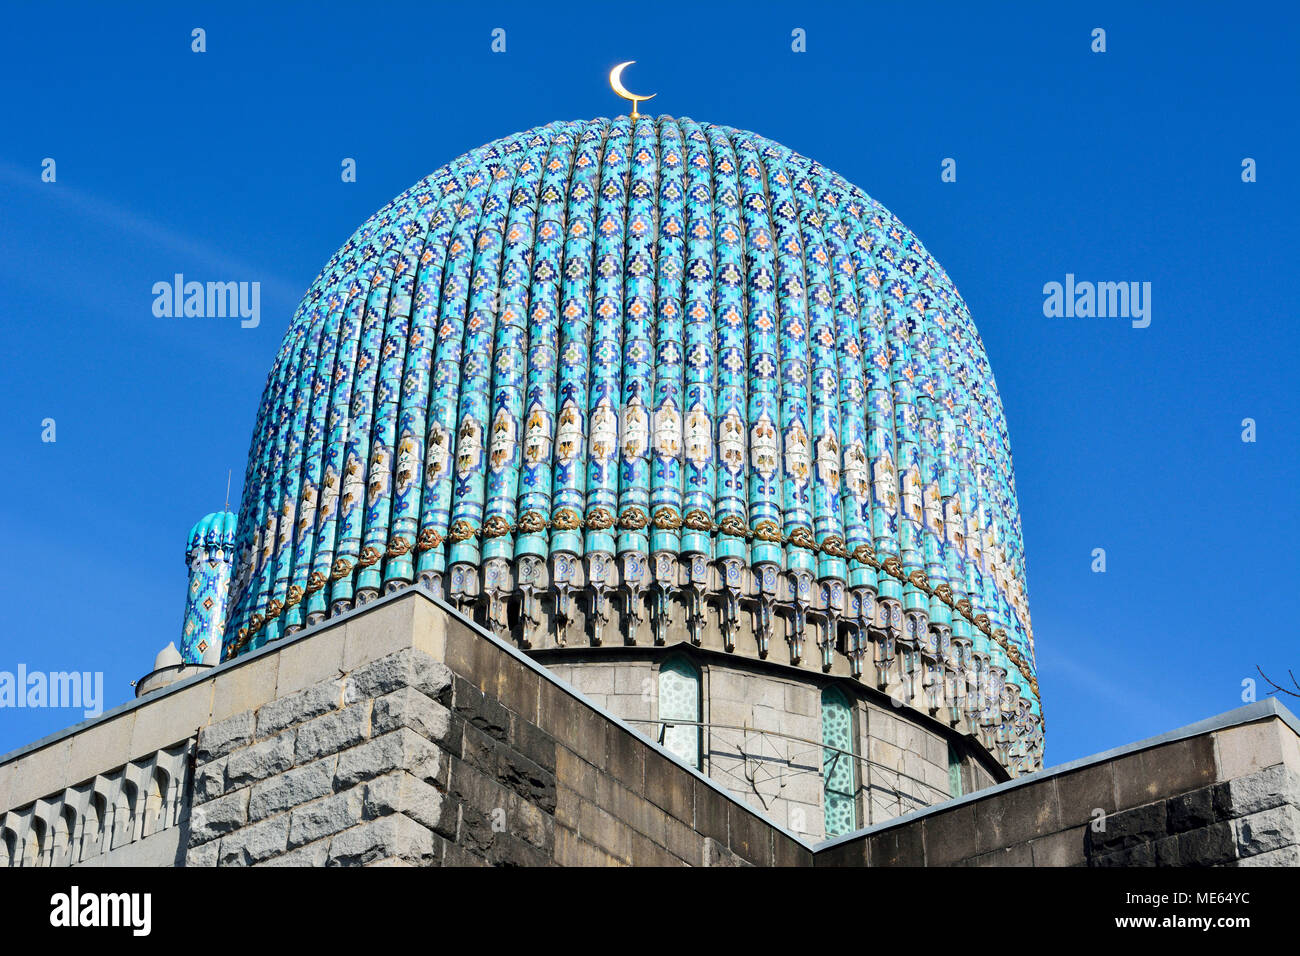 St Petersburg, Russia - March 27, 2018. Dome of the St Petersburg mosque, with mosaic ceramics. Stock Photo